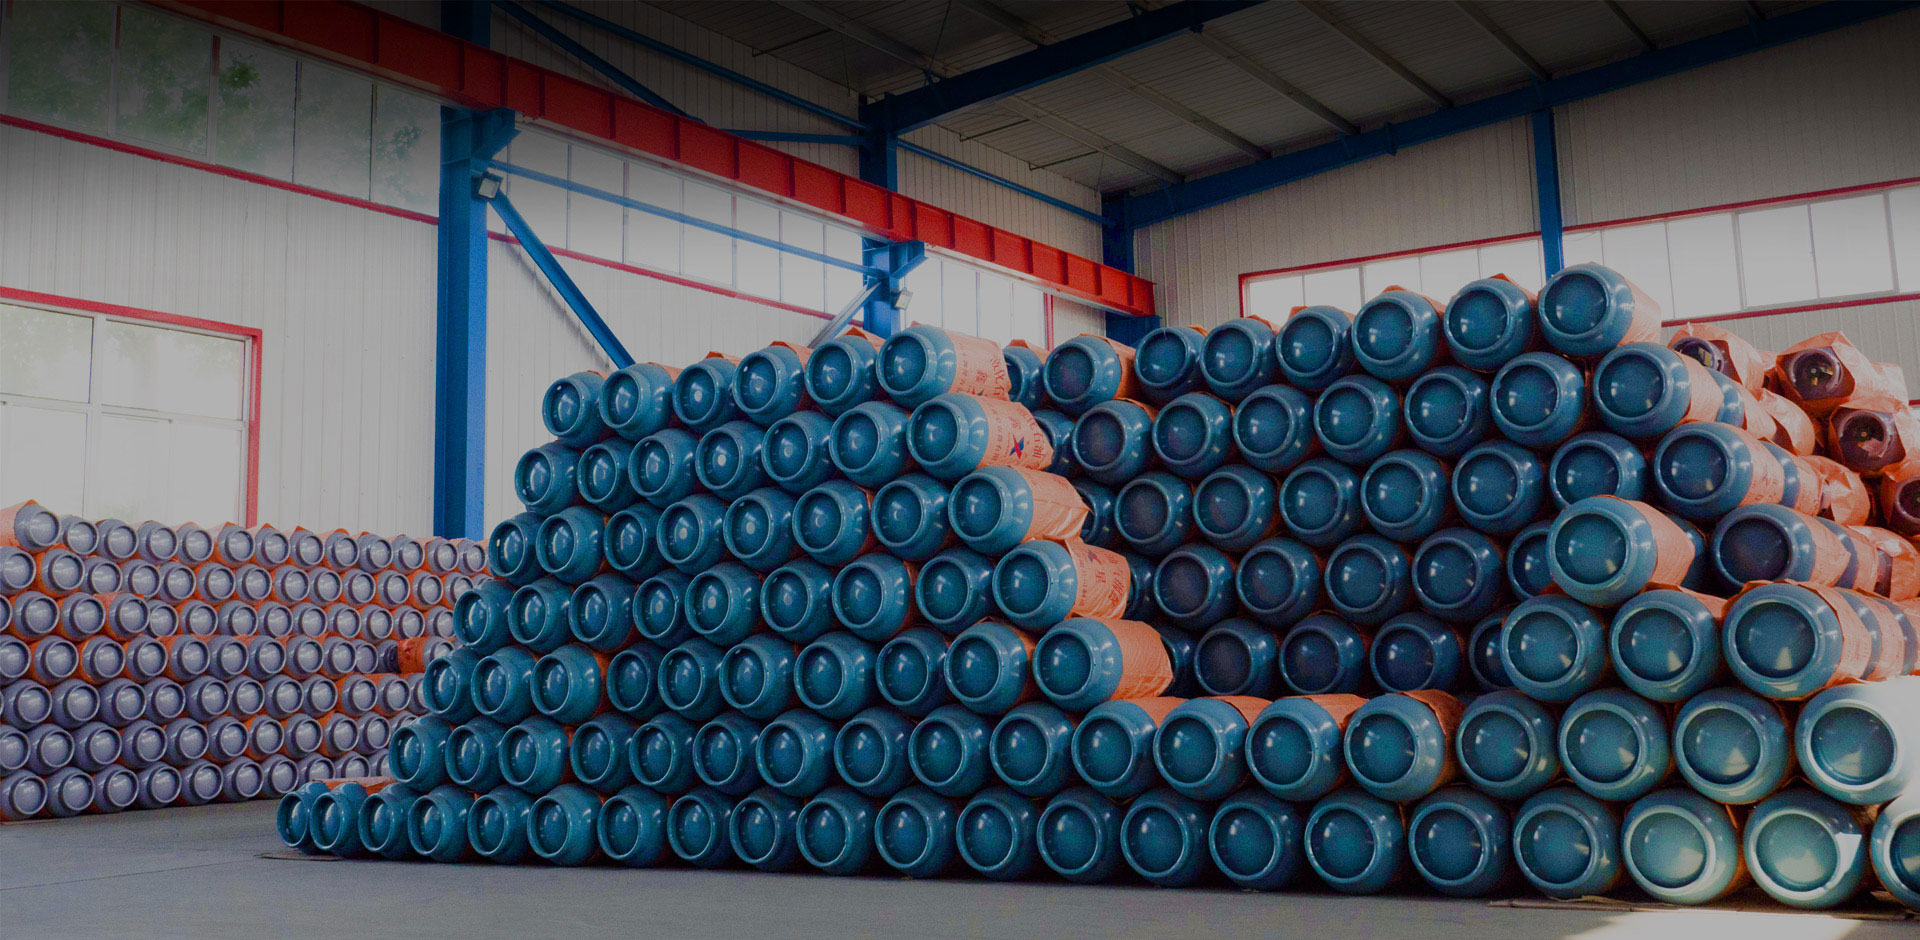 Shandong Xinxing comprehensively designs and produces up to 2 million LPG cylinders a year.